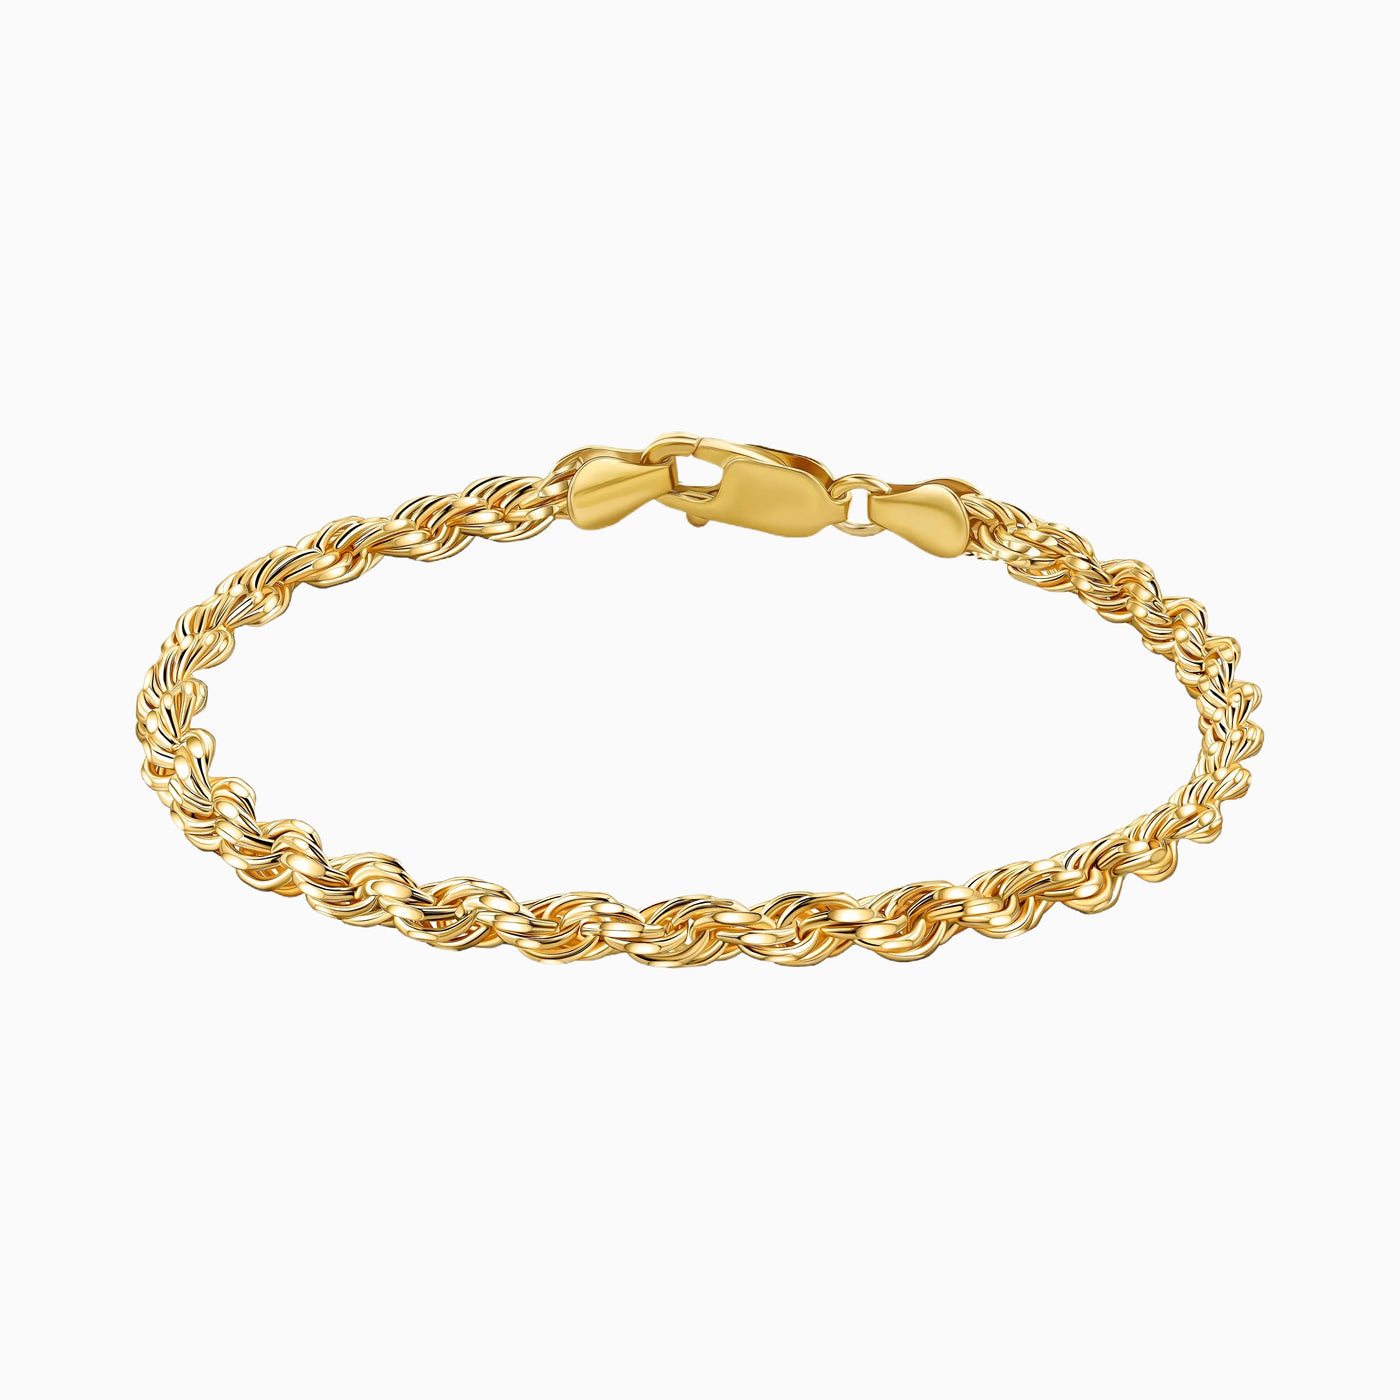 SOLID GOLD 4MM ROPE CHAIN BRACELET